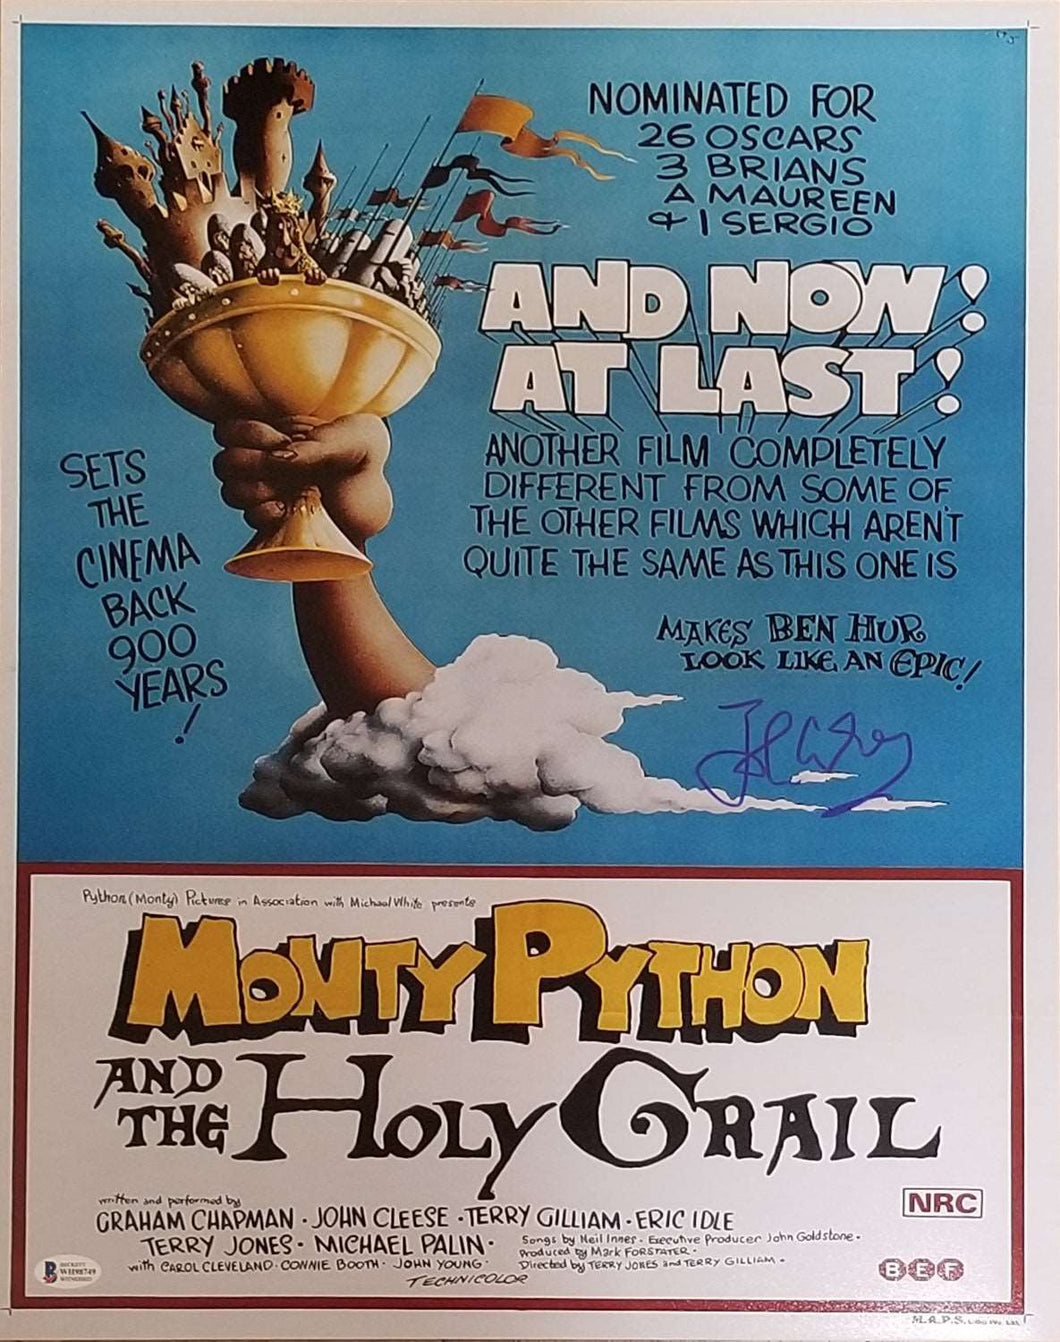 John Cleese - Signed 16x20 Monty Python and the Holy Grail Movie Poster